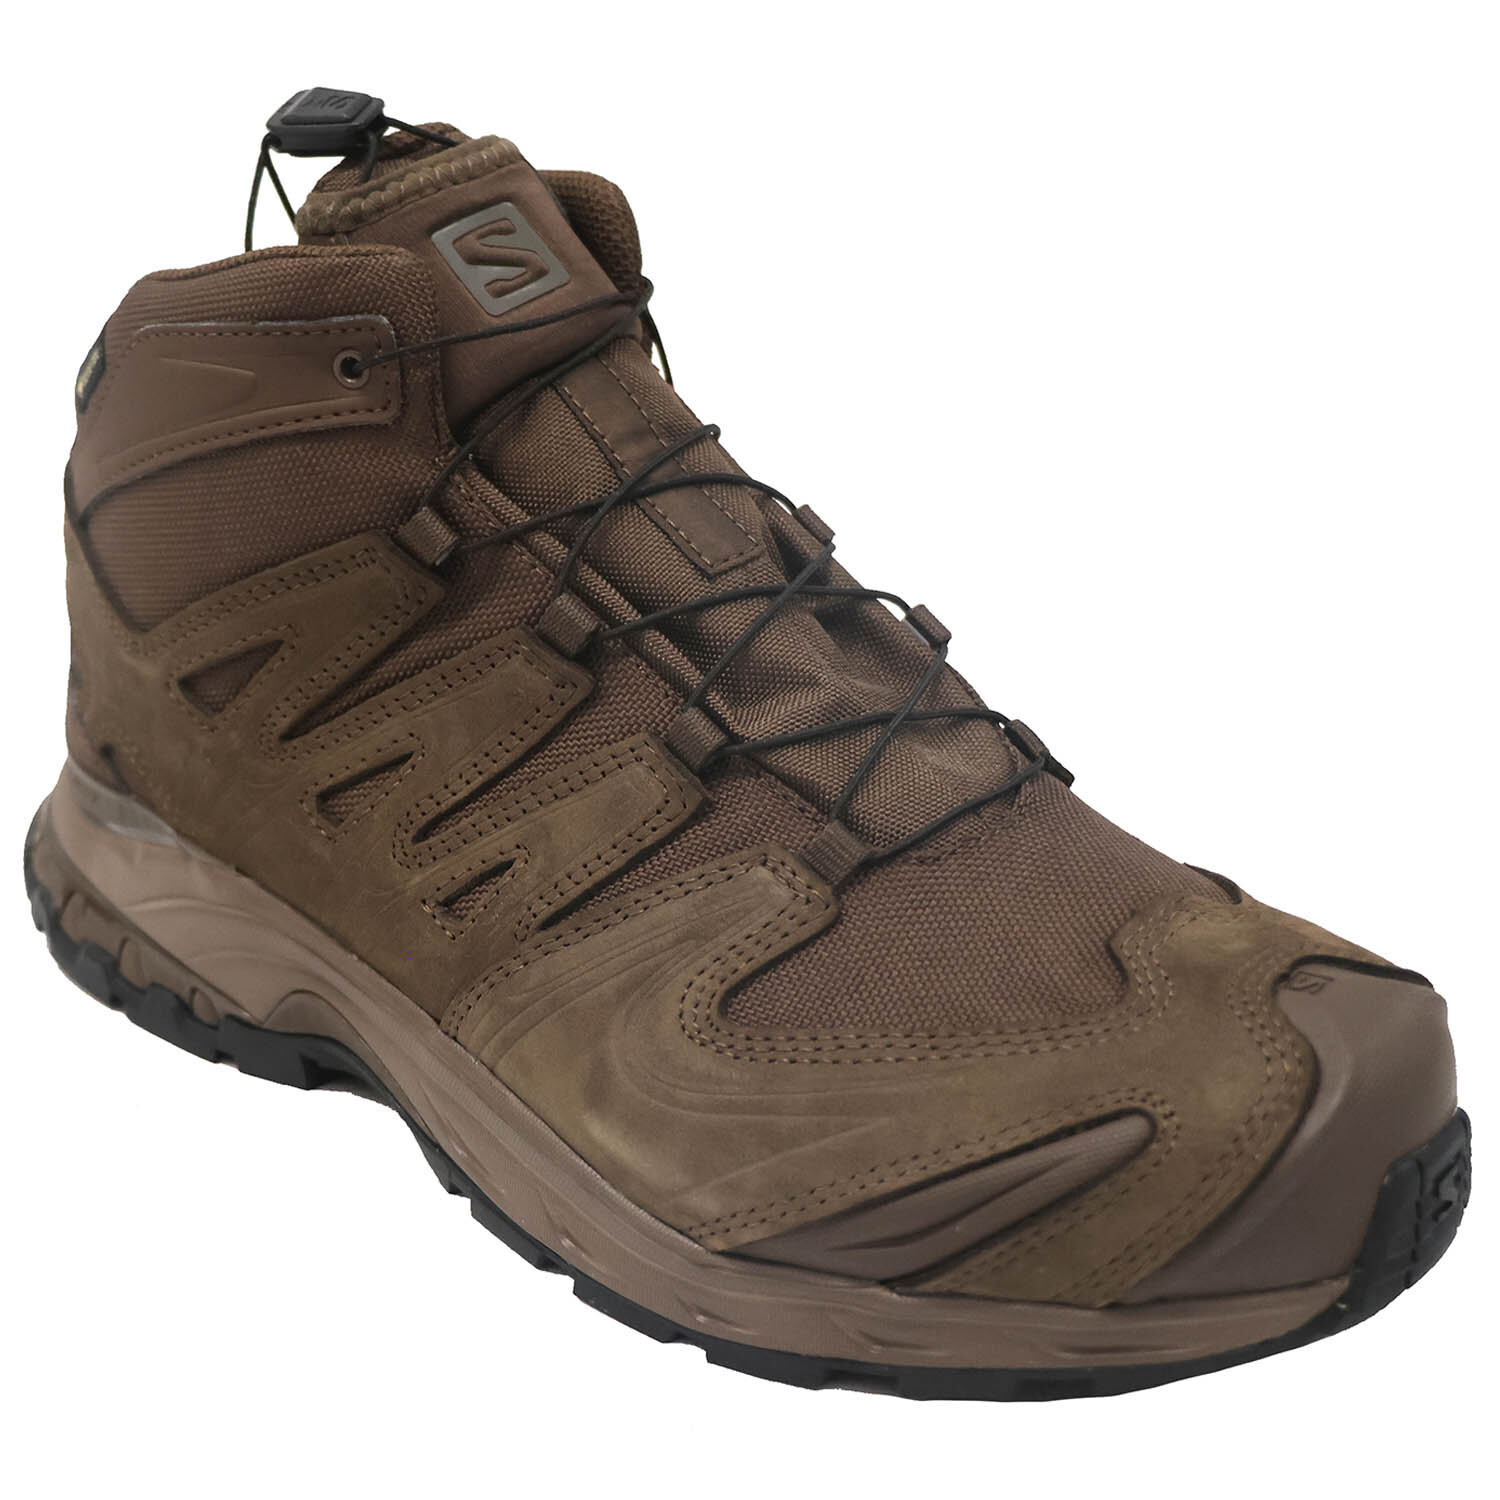 XA FORCES MID GORE-TEX, BROWN